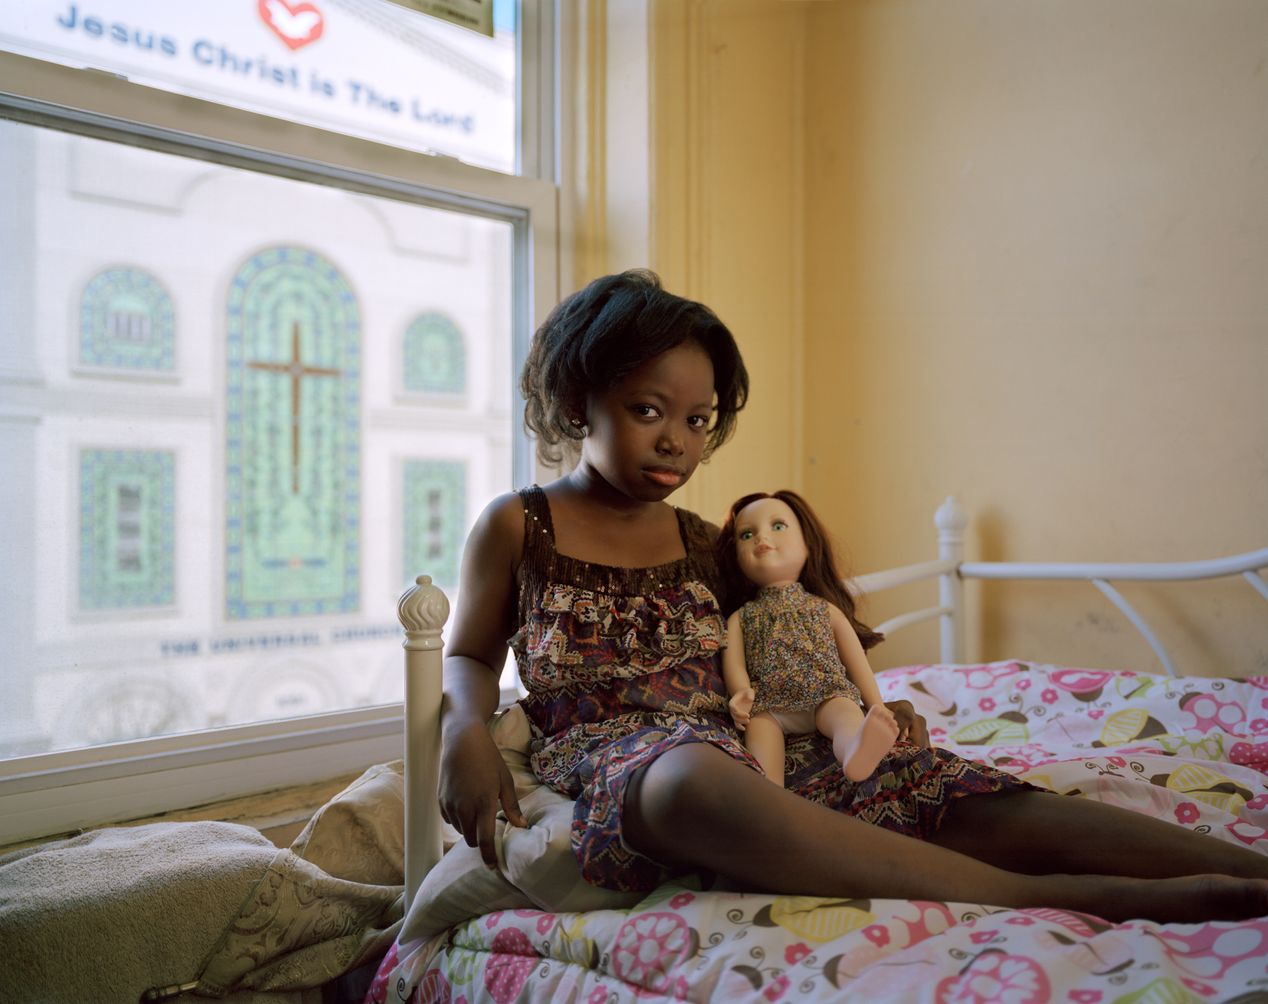 A young black girl holding a white doll, environmental portrait photography, Ilona Szwarc, contemporary Los Angeles artist.